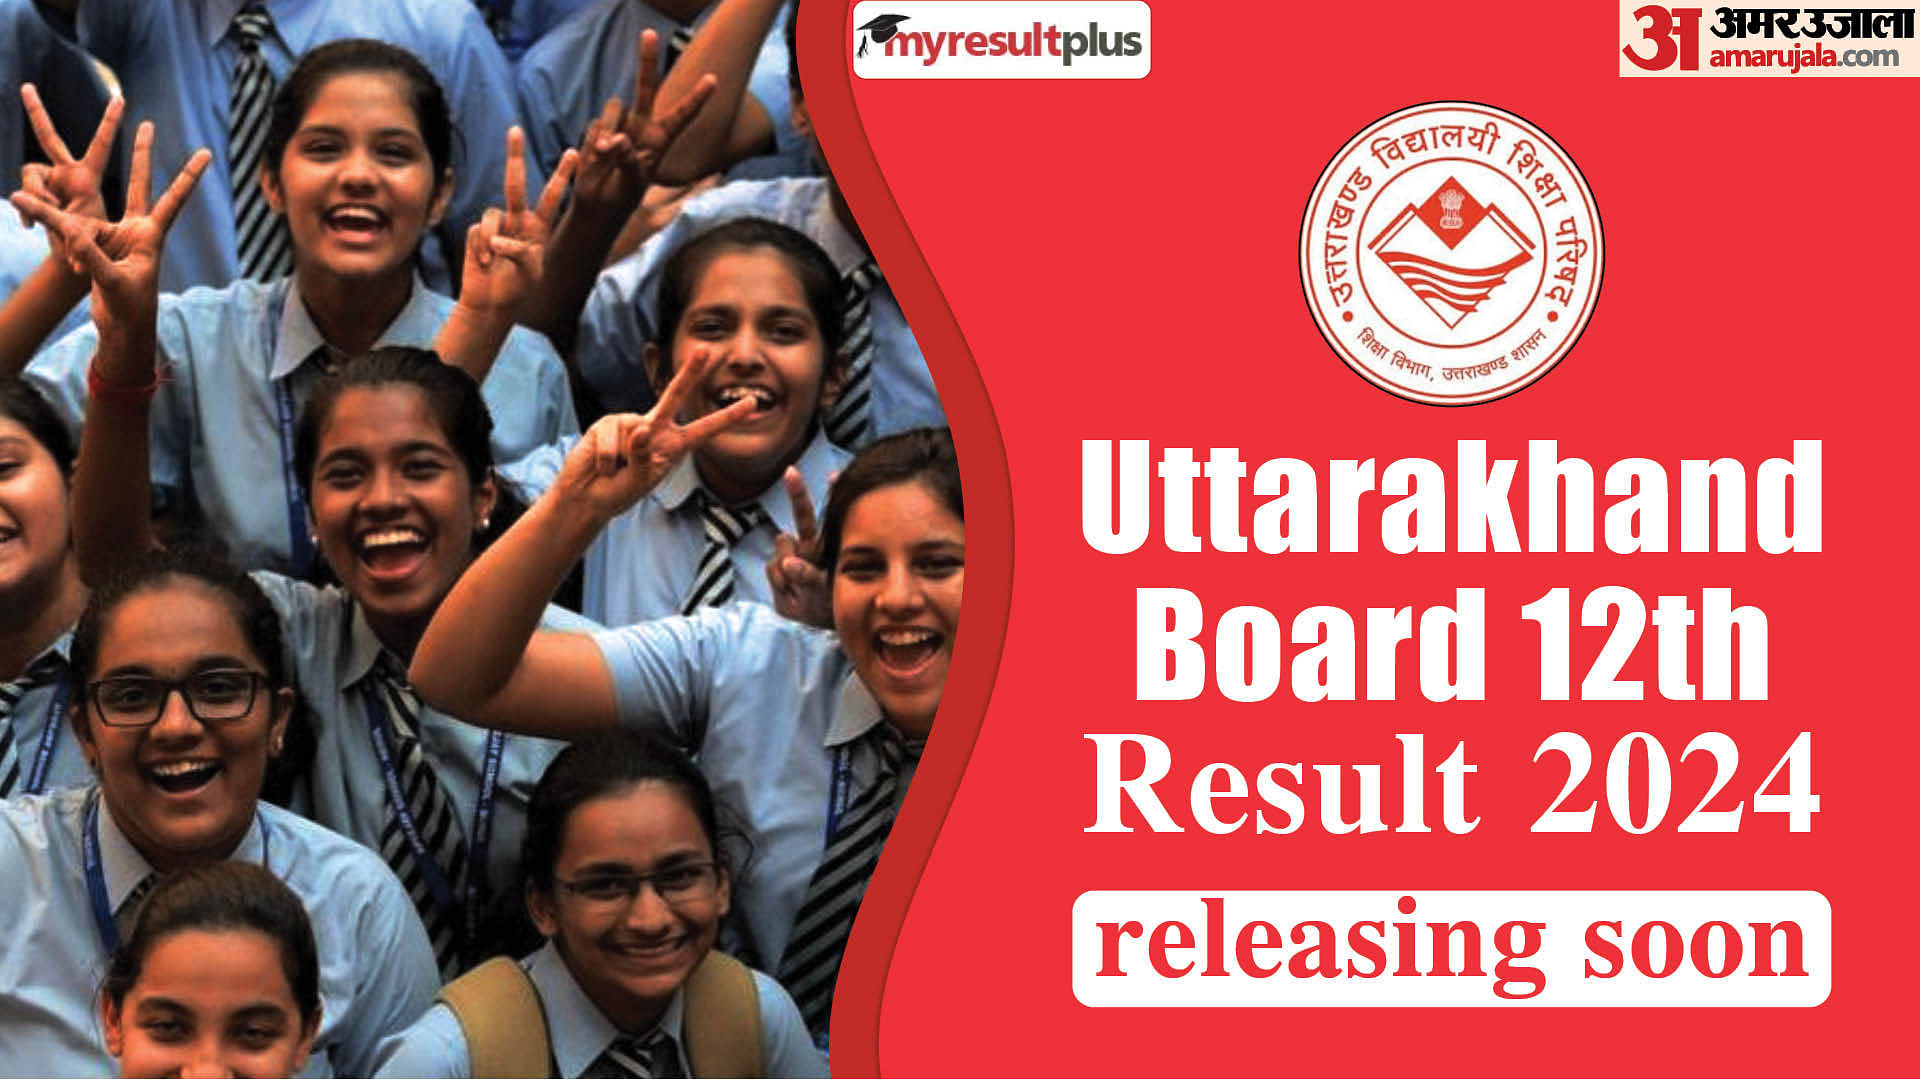 UK Board Result 2024: Uttarakhand Board 12th Result Releasing Soon, Read How to Check Result Via SMS Here